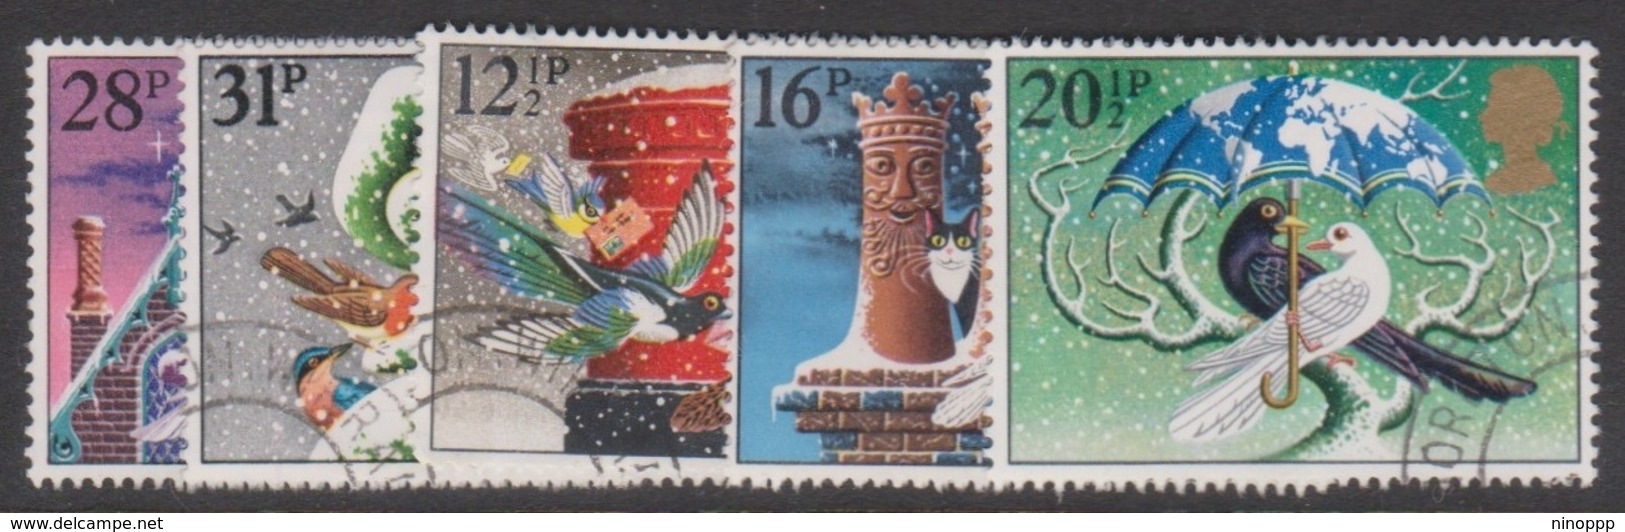 Great Britain SG 1231-1235 1983 Christmas, Used - Used Stamps